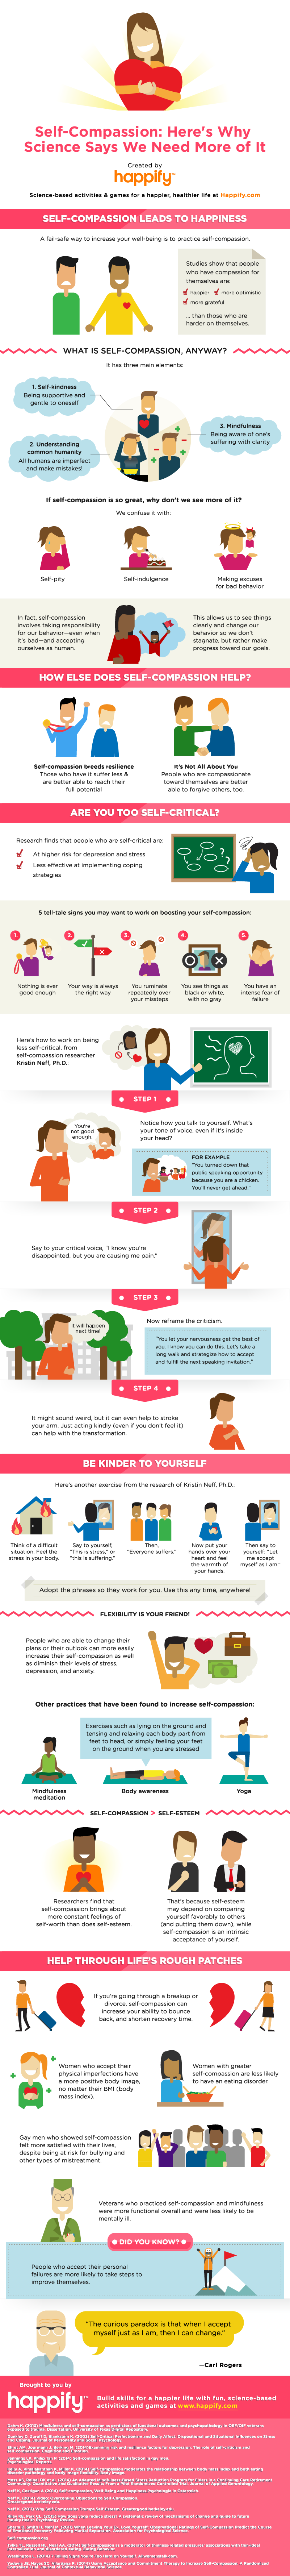 Self-Compassion: Why Science Says We Need More of It (A great infographic from Happify.)